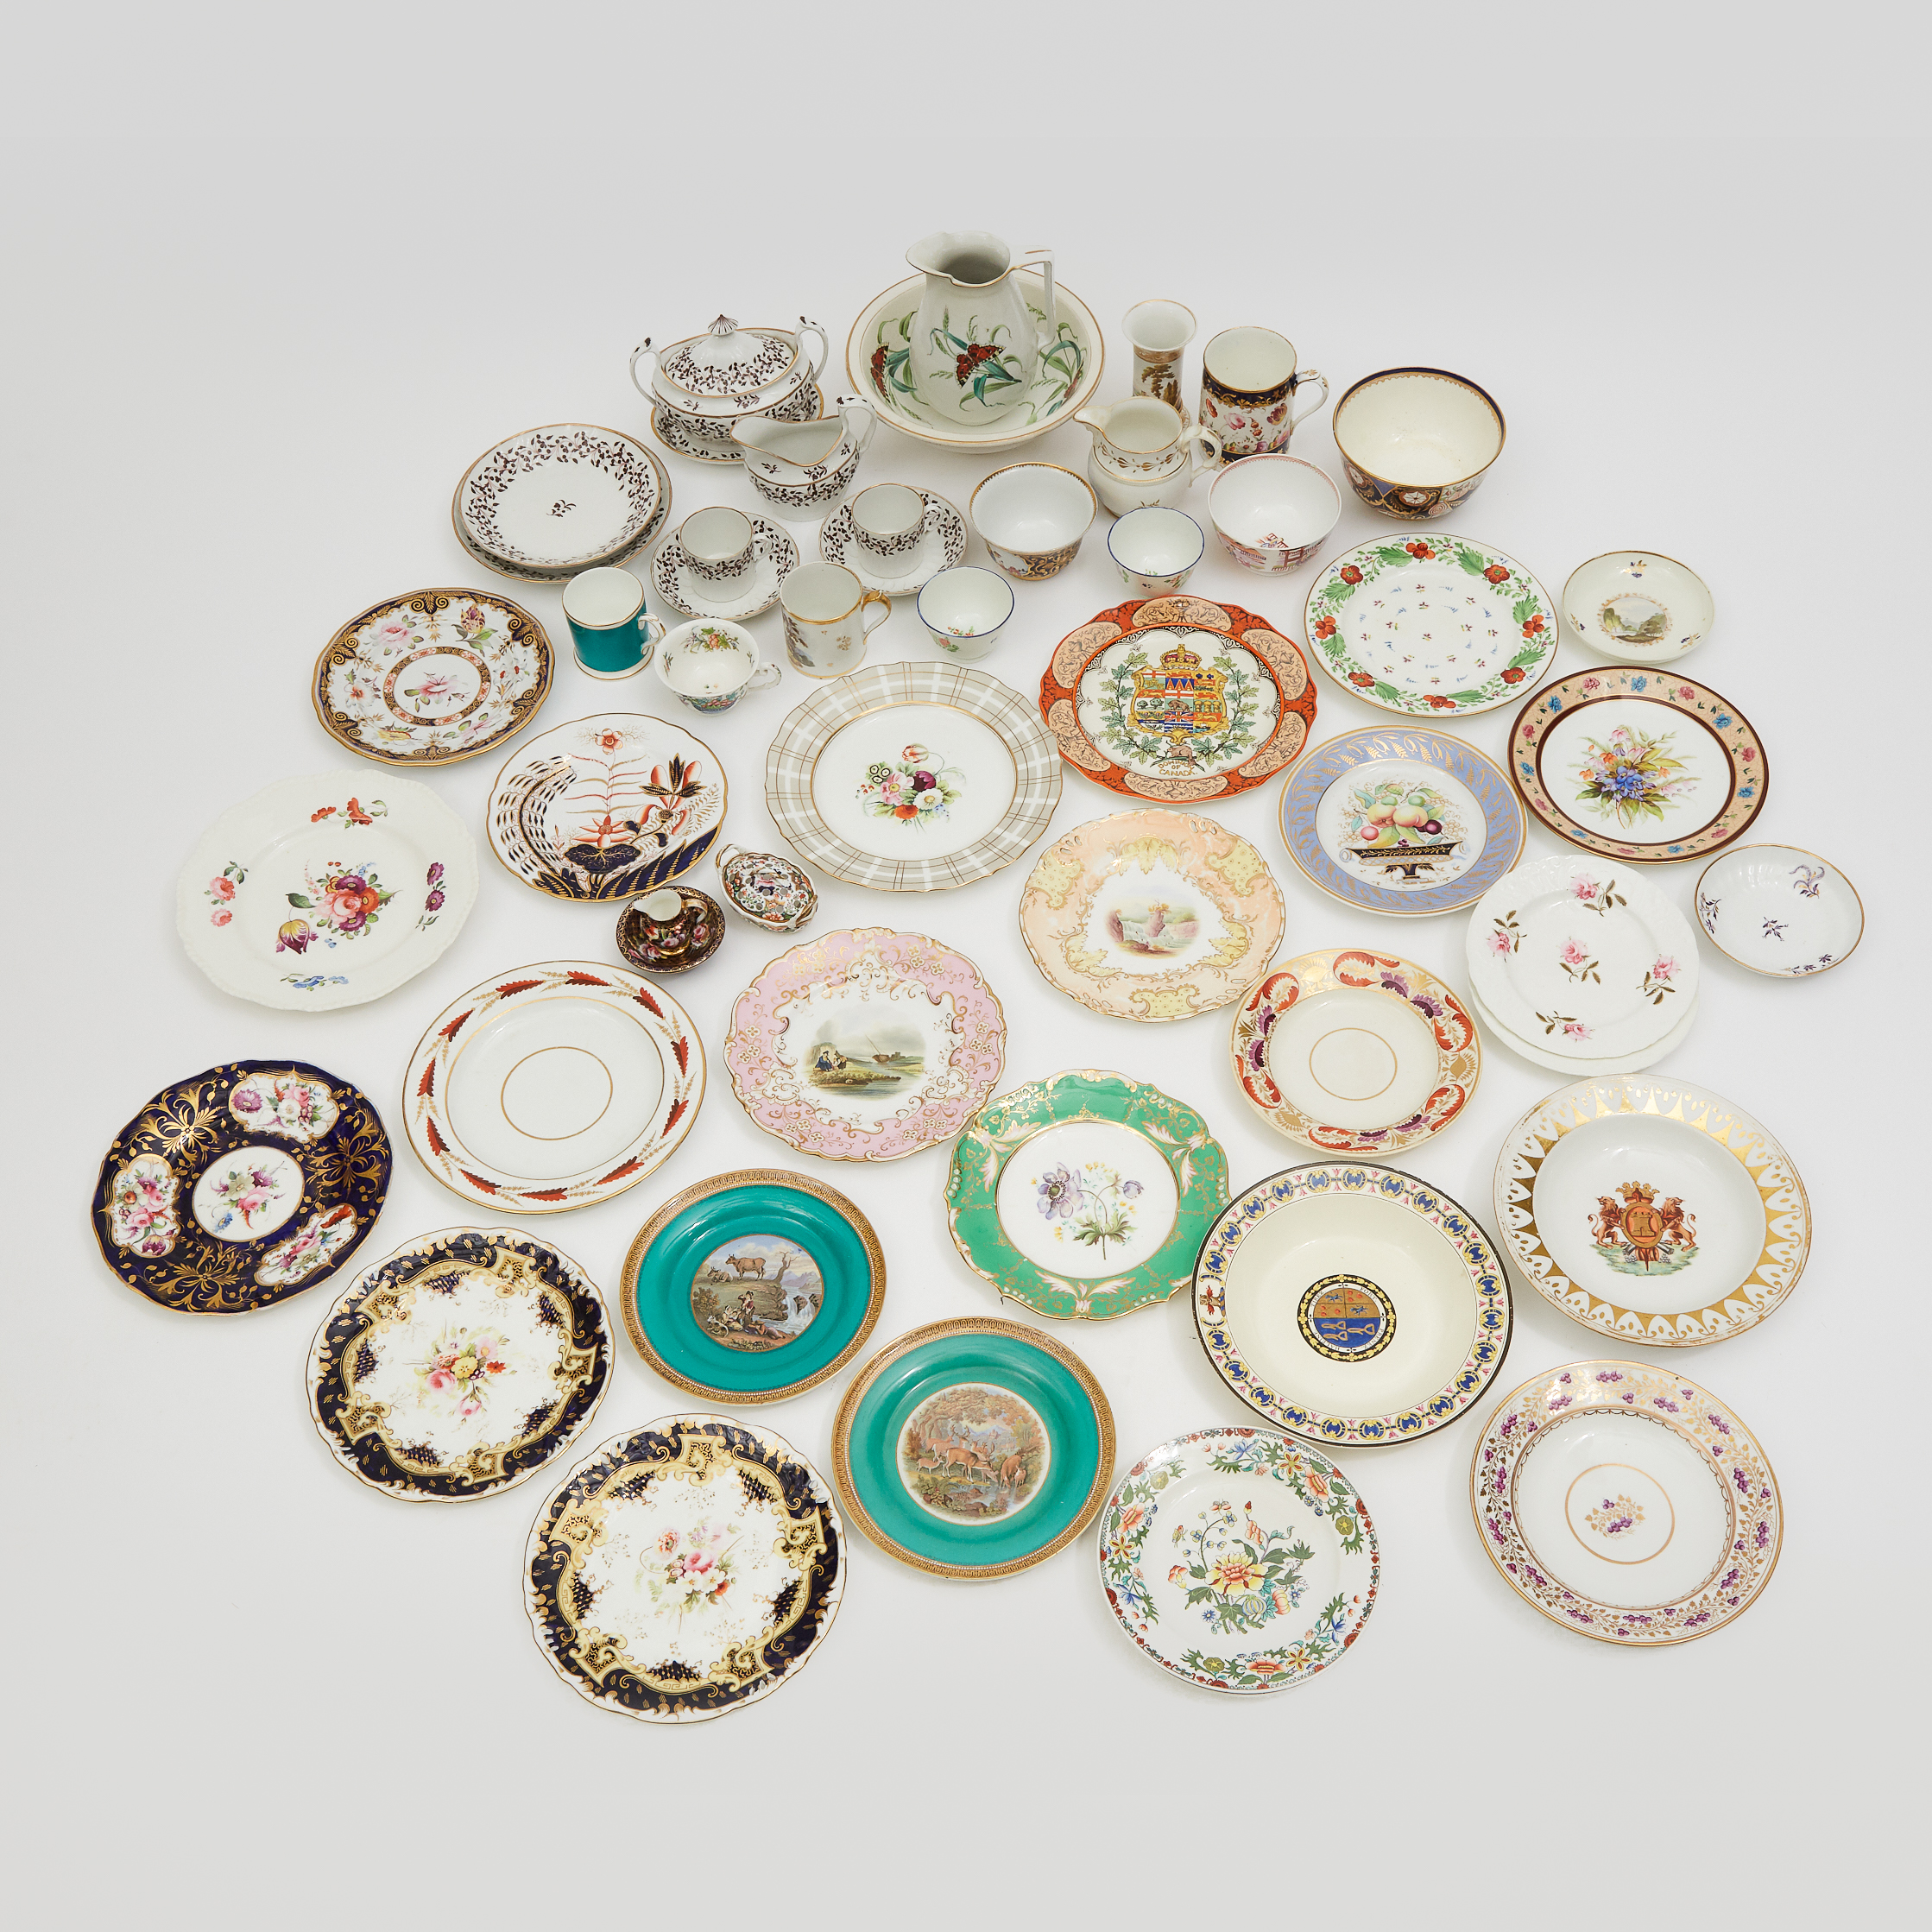 Group of English Pottery and Porcelain, 19th century